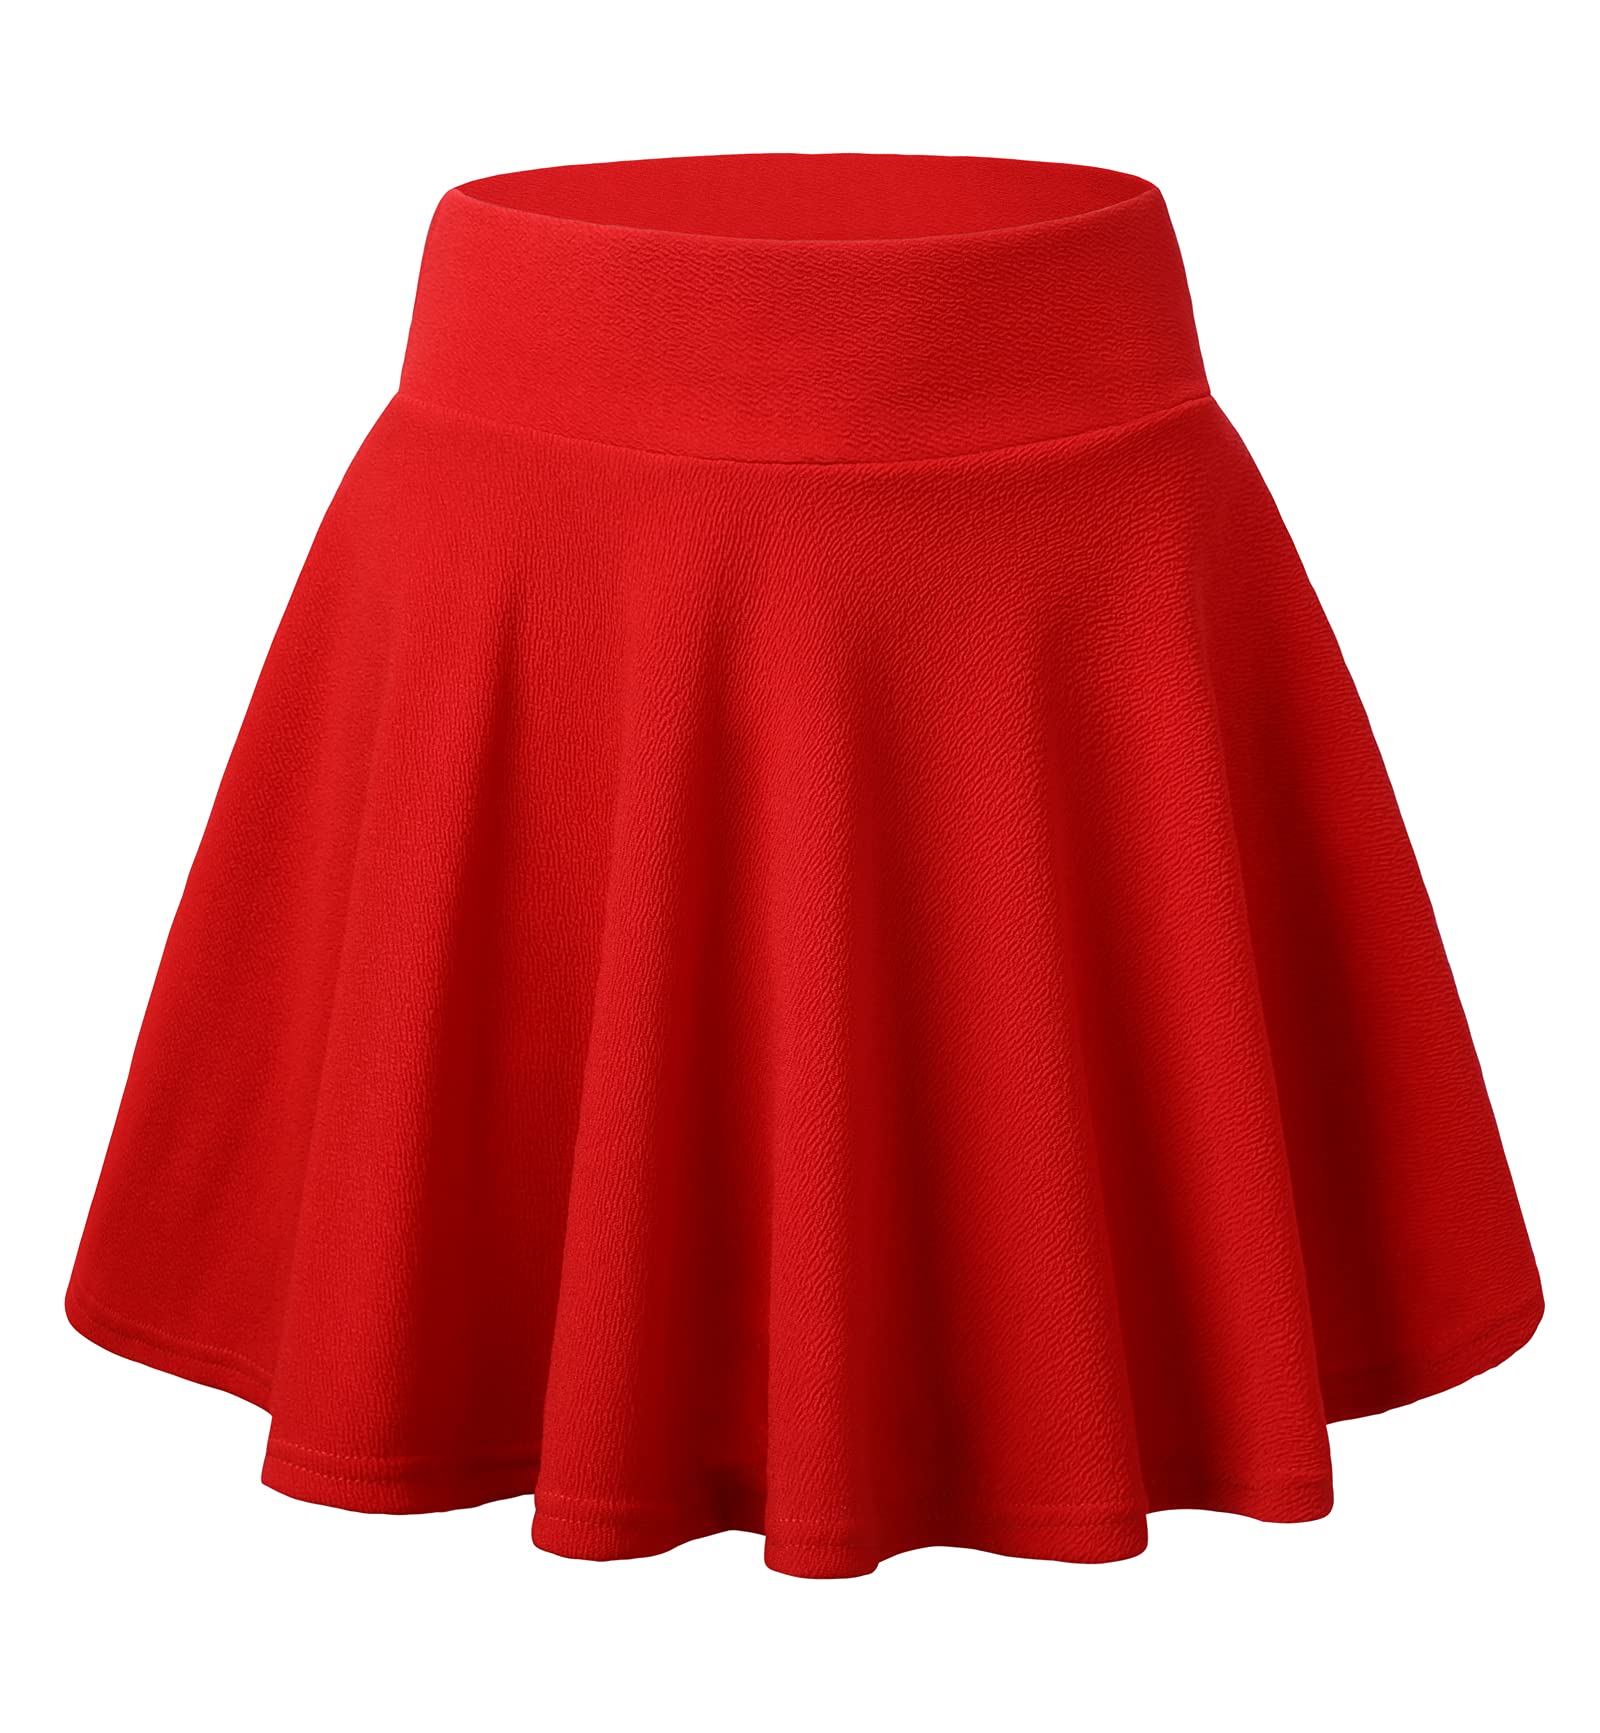 DJT FASHION Women's Casual Stretchy Flared Pleated Mini Skater Skirt with  Shorts